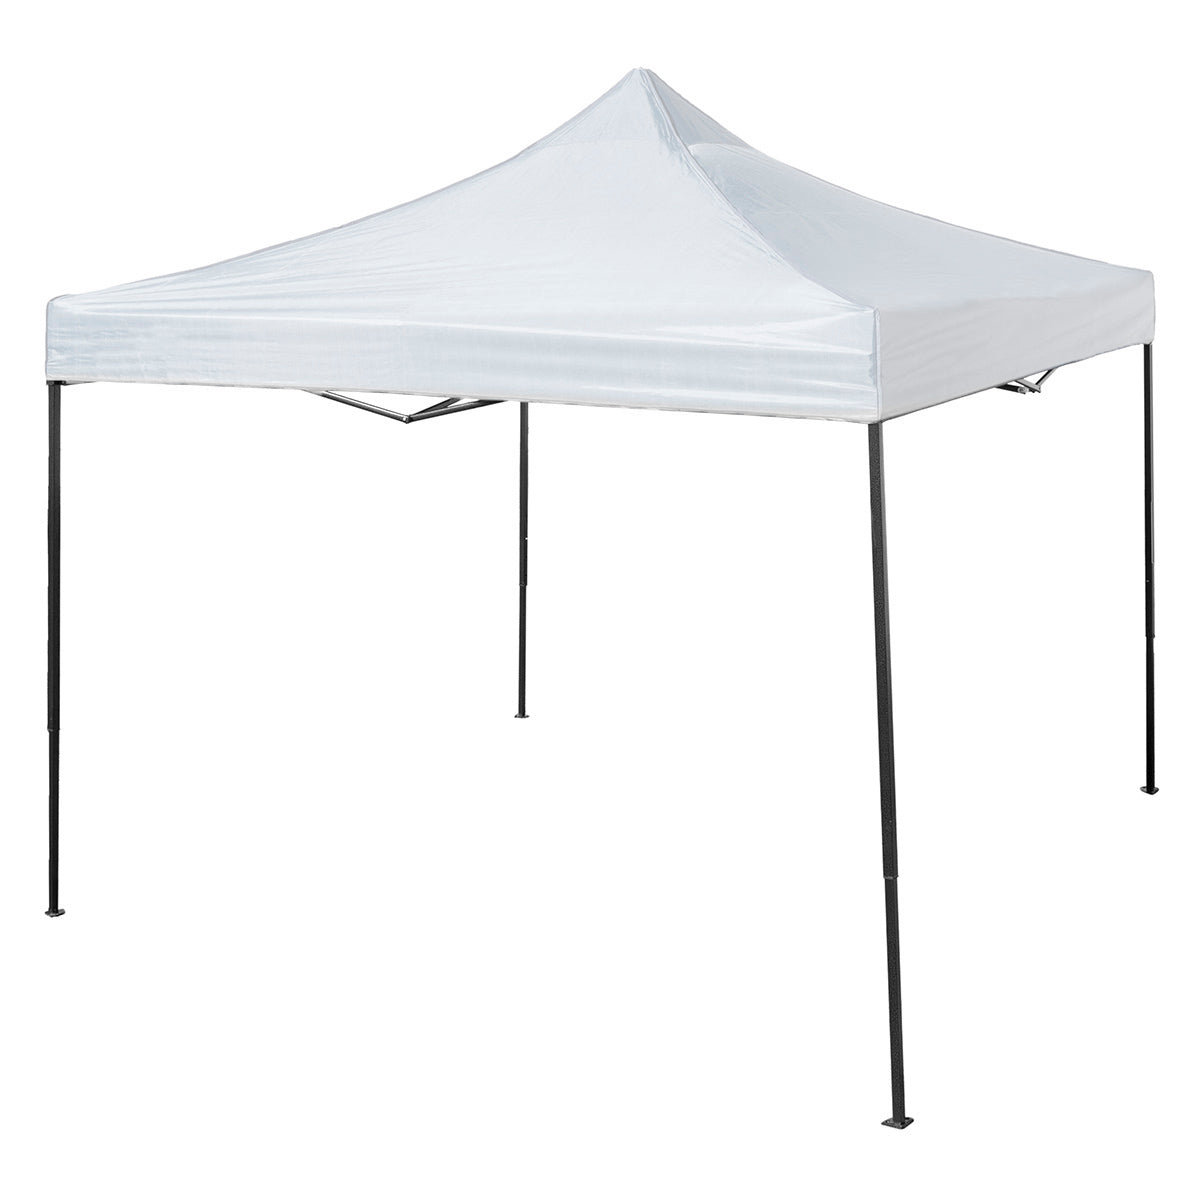 10' x 10' Folding Pop-Up Canopy (White, Blue, Red)